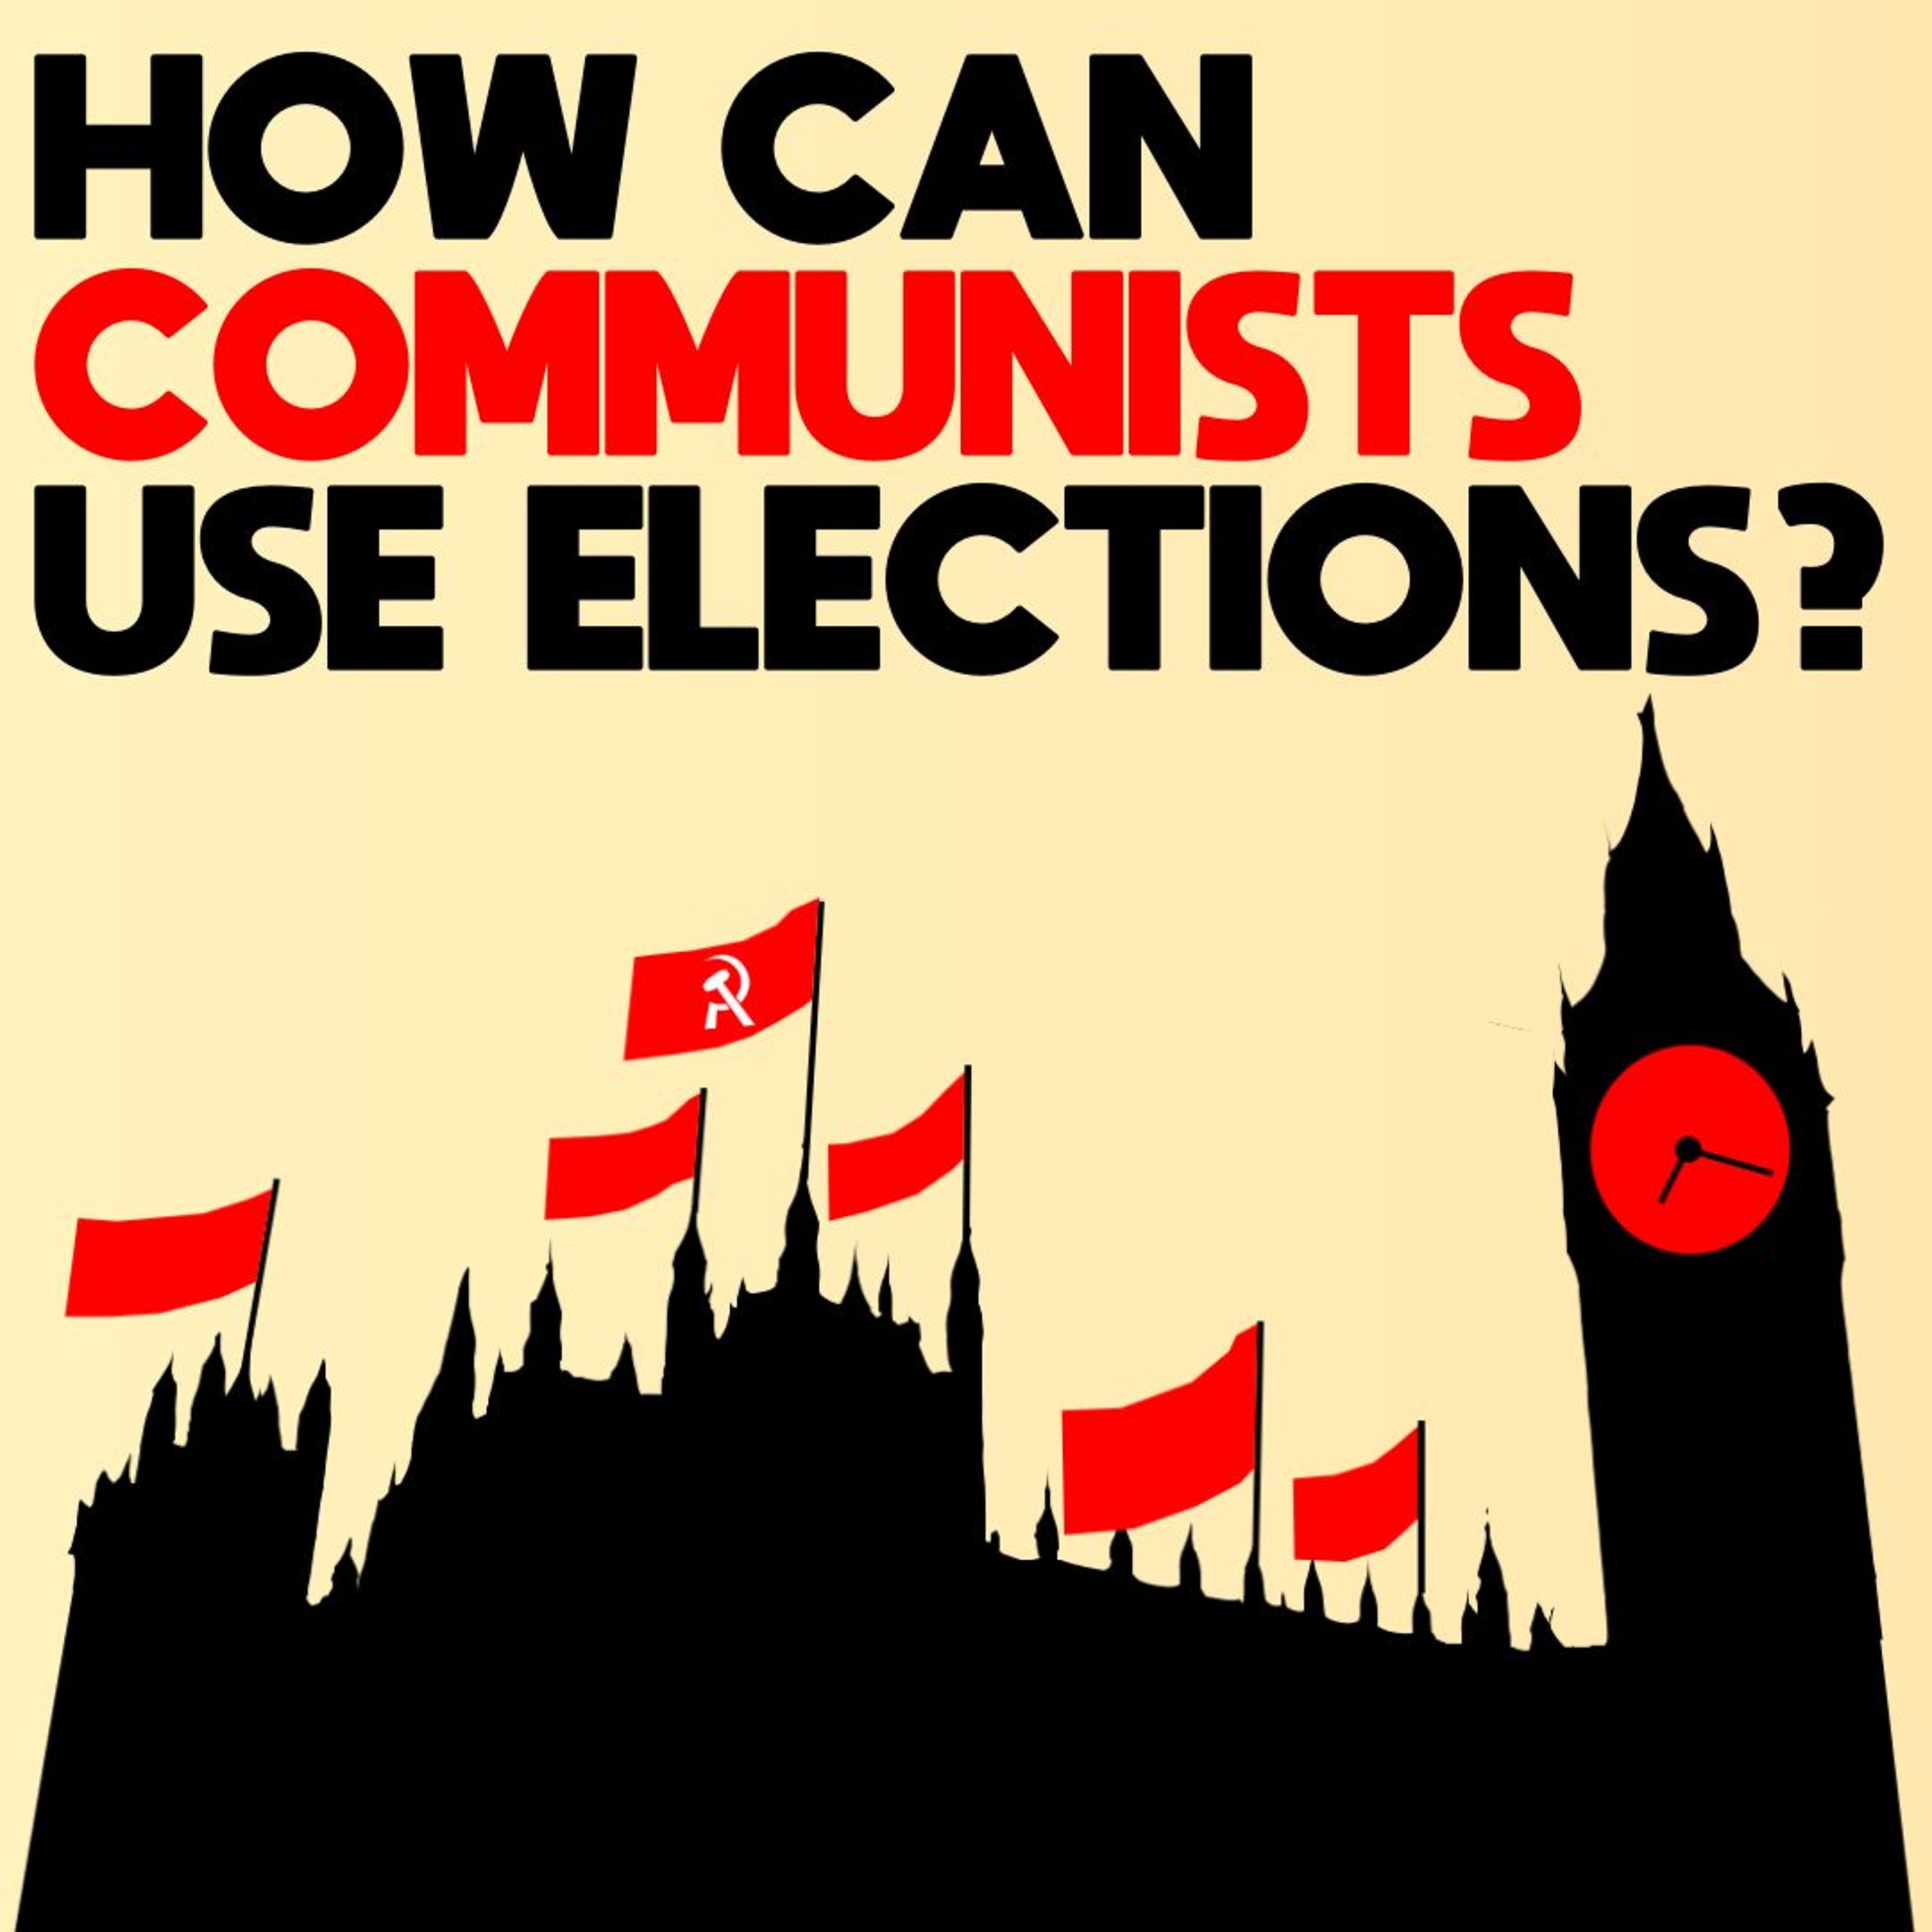 How can communists use elections?